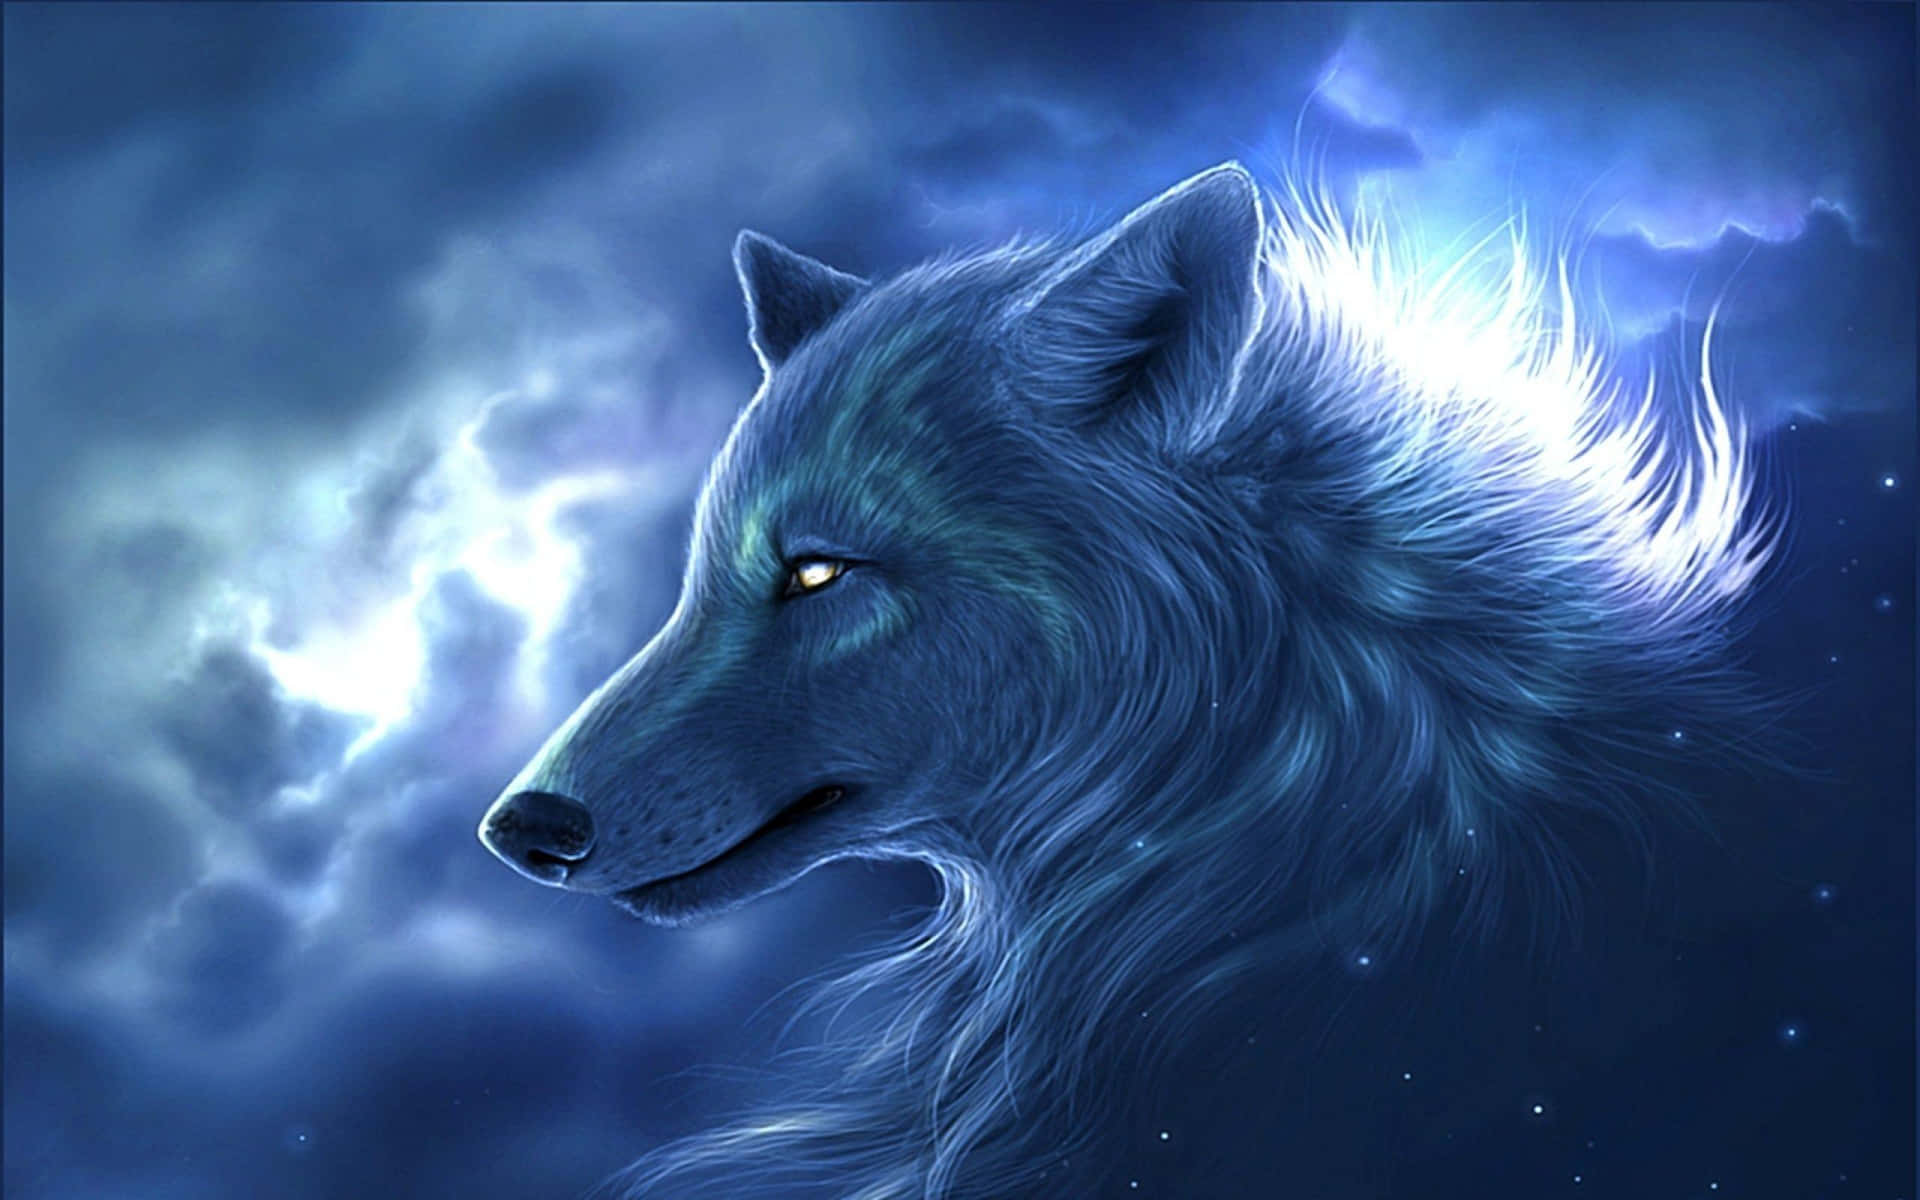 Explore the Galaxy with this Ethereal Wolf